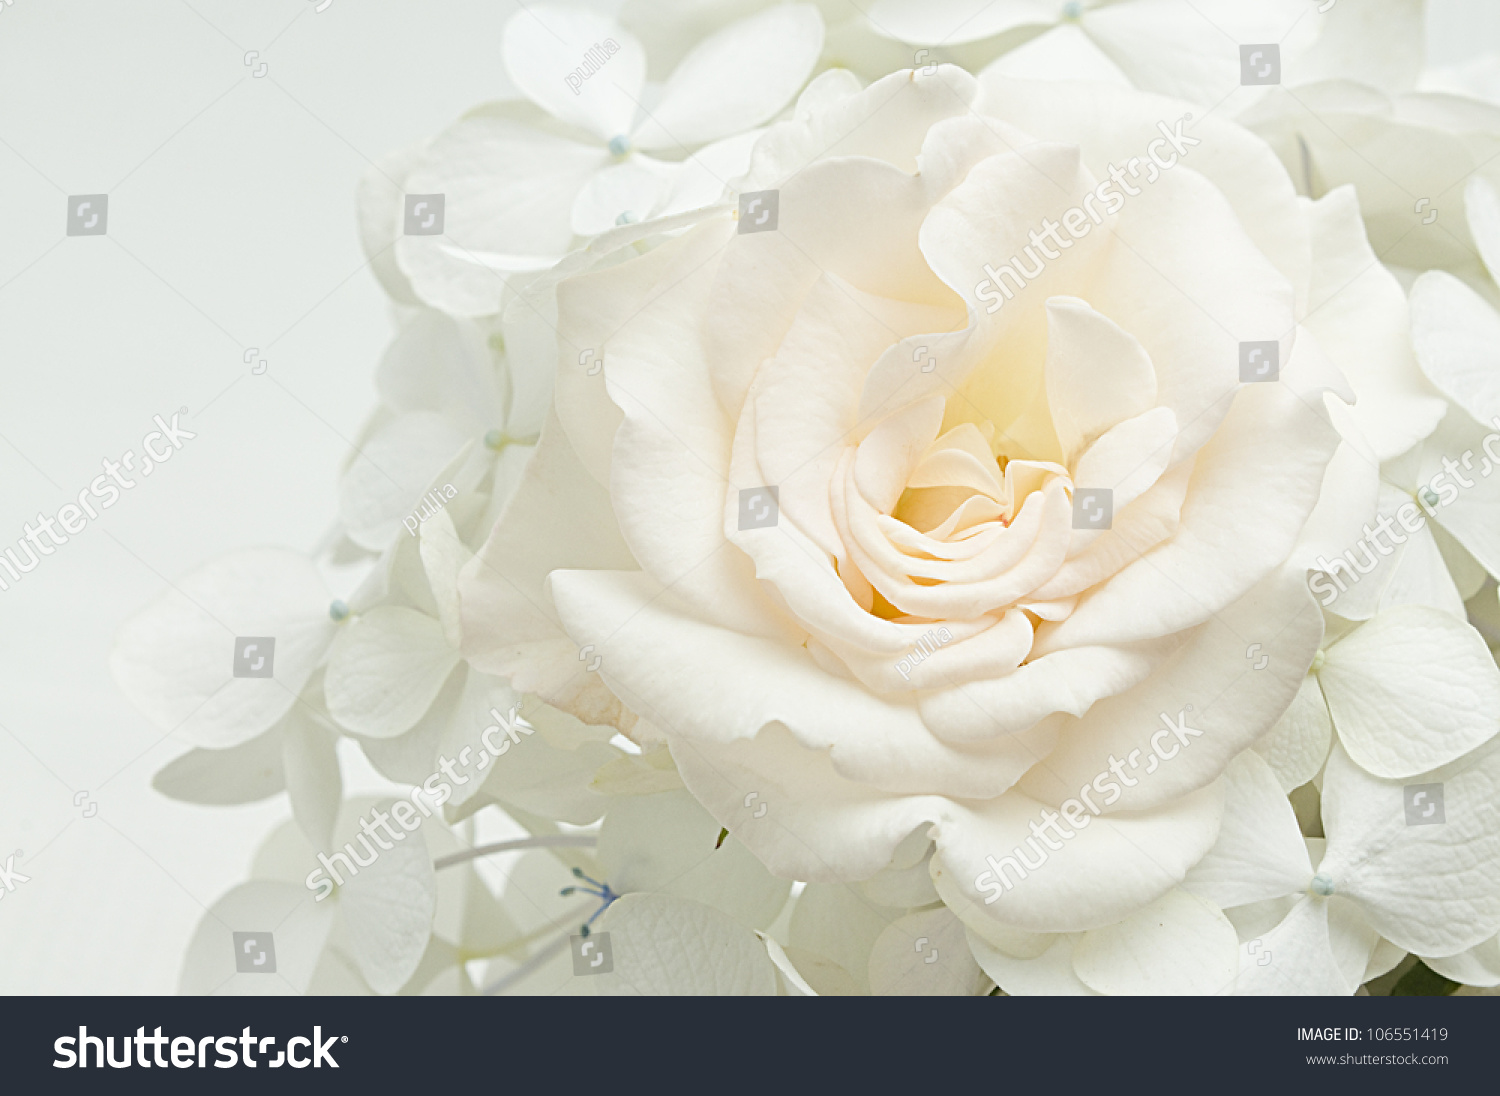 floral background of white flowers #106551419